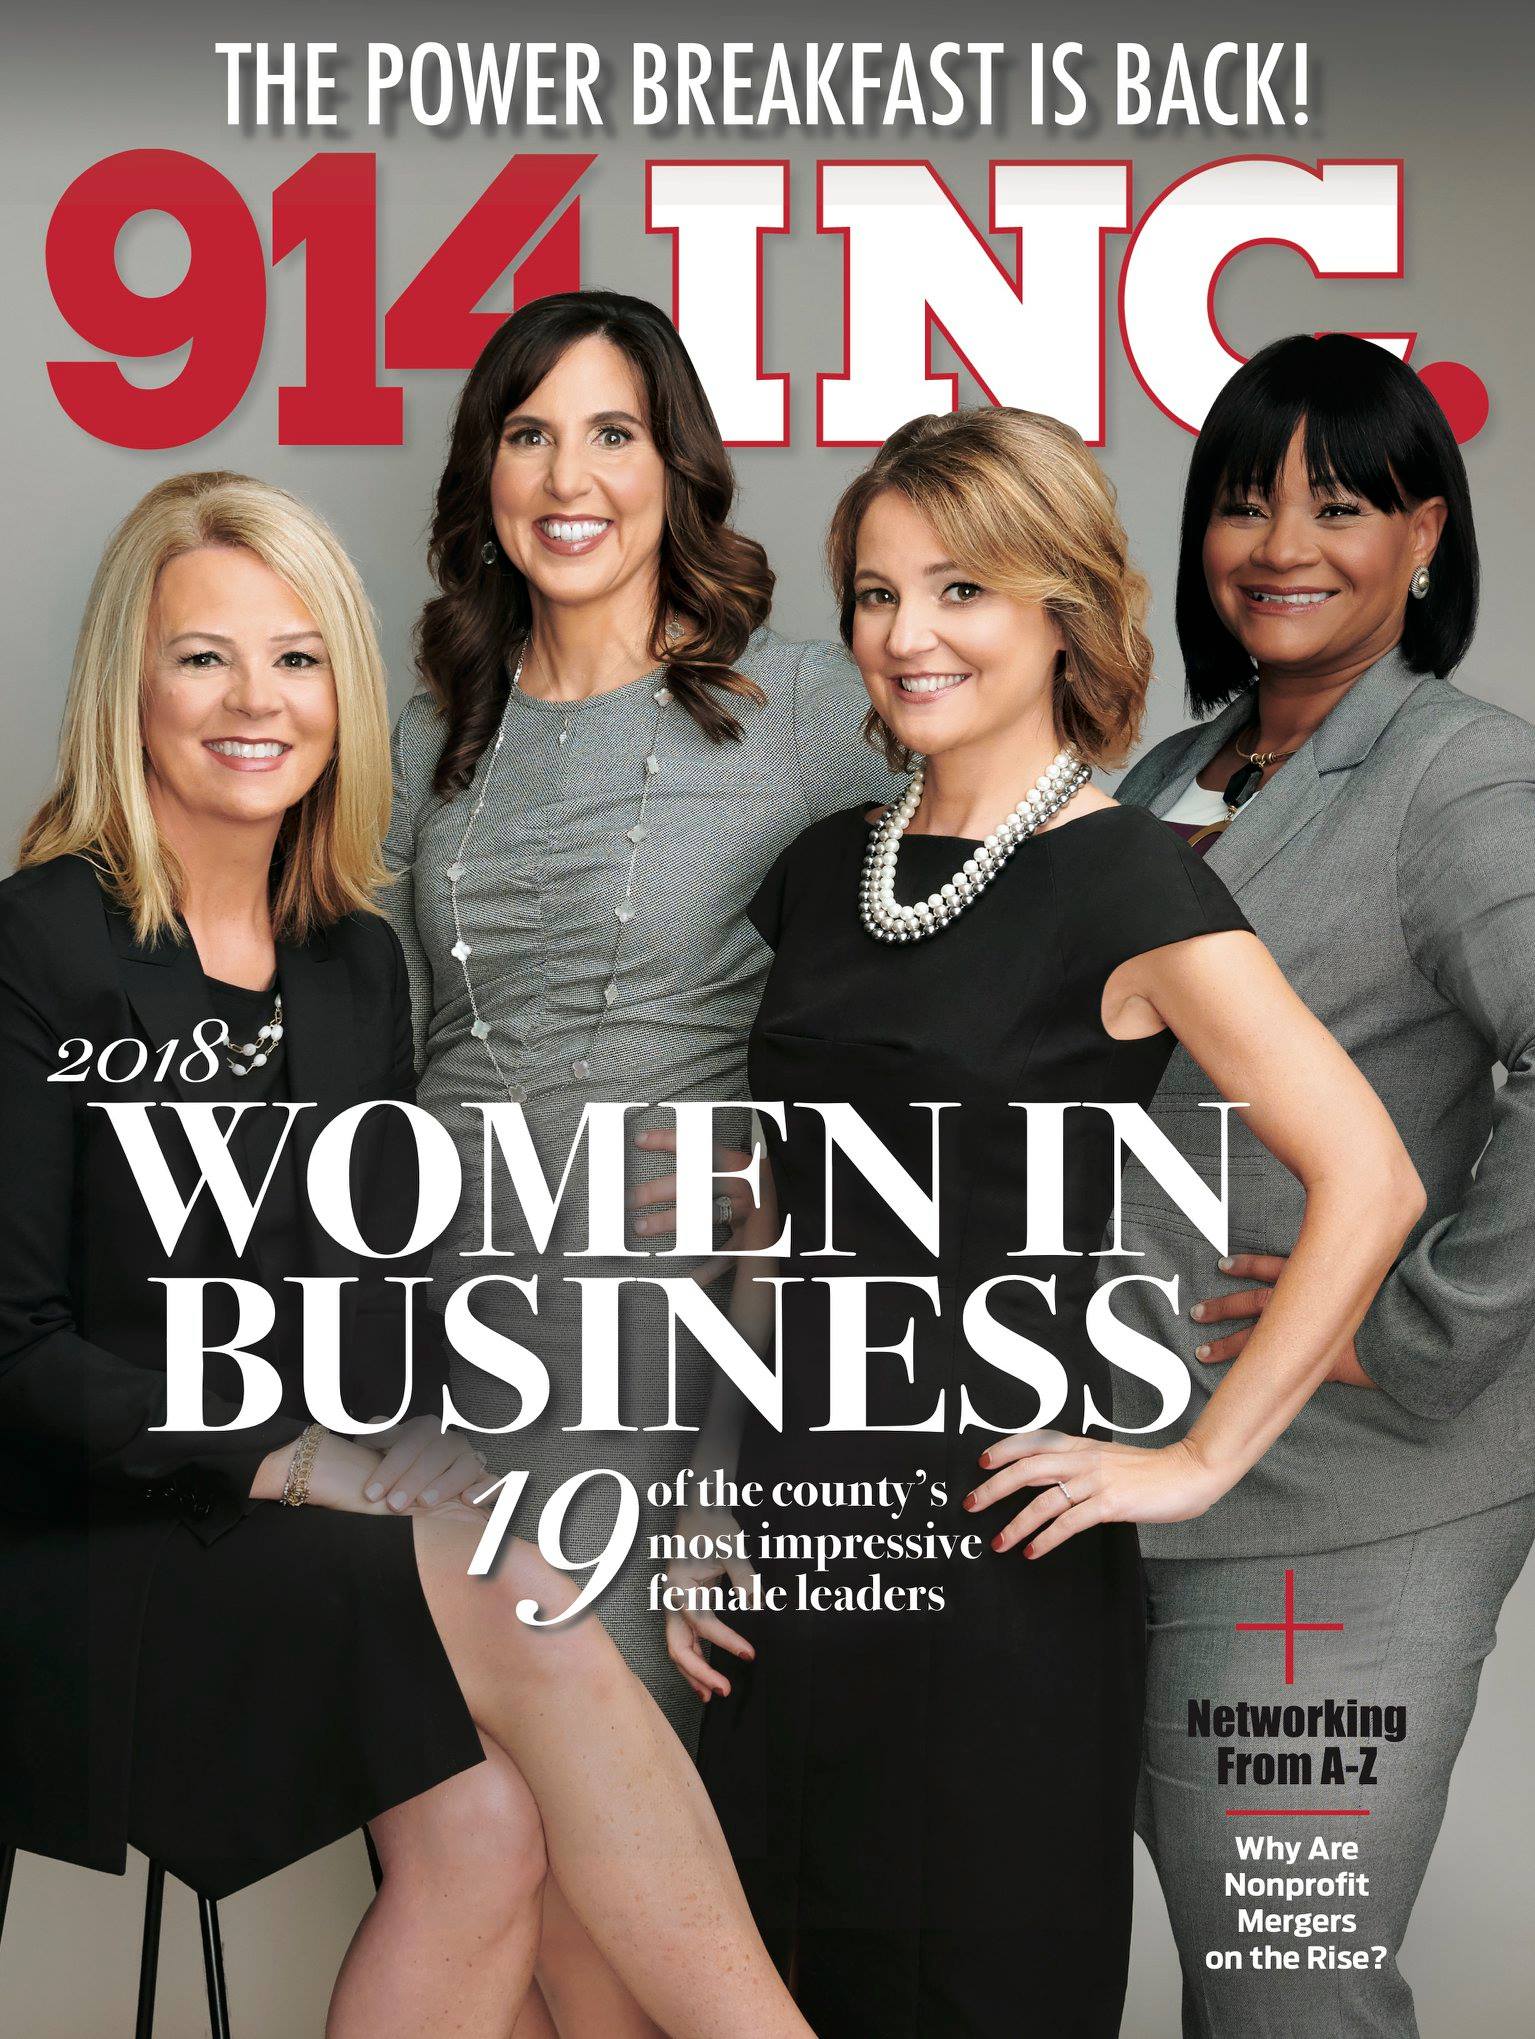 Jennifer Riekert, M.B.A., second from right, named as one of Westchester\'s top female leaders by 914 Inc. magazine.